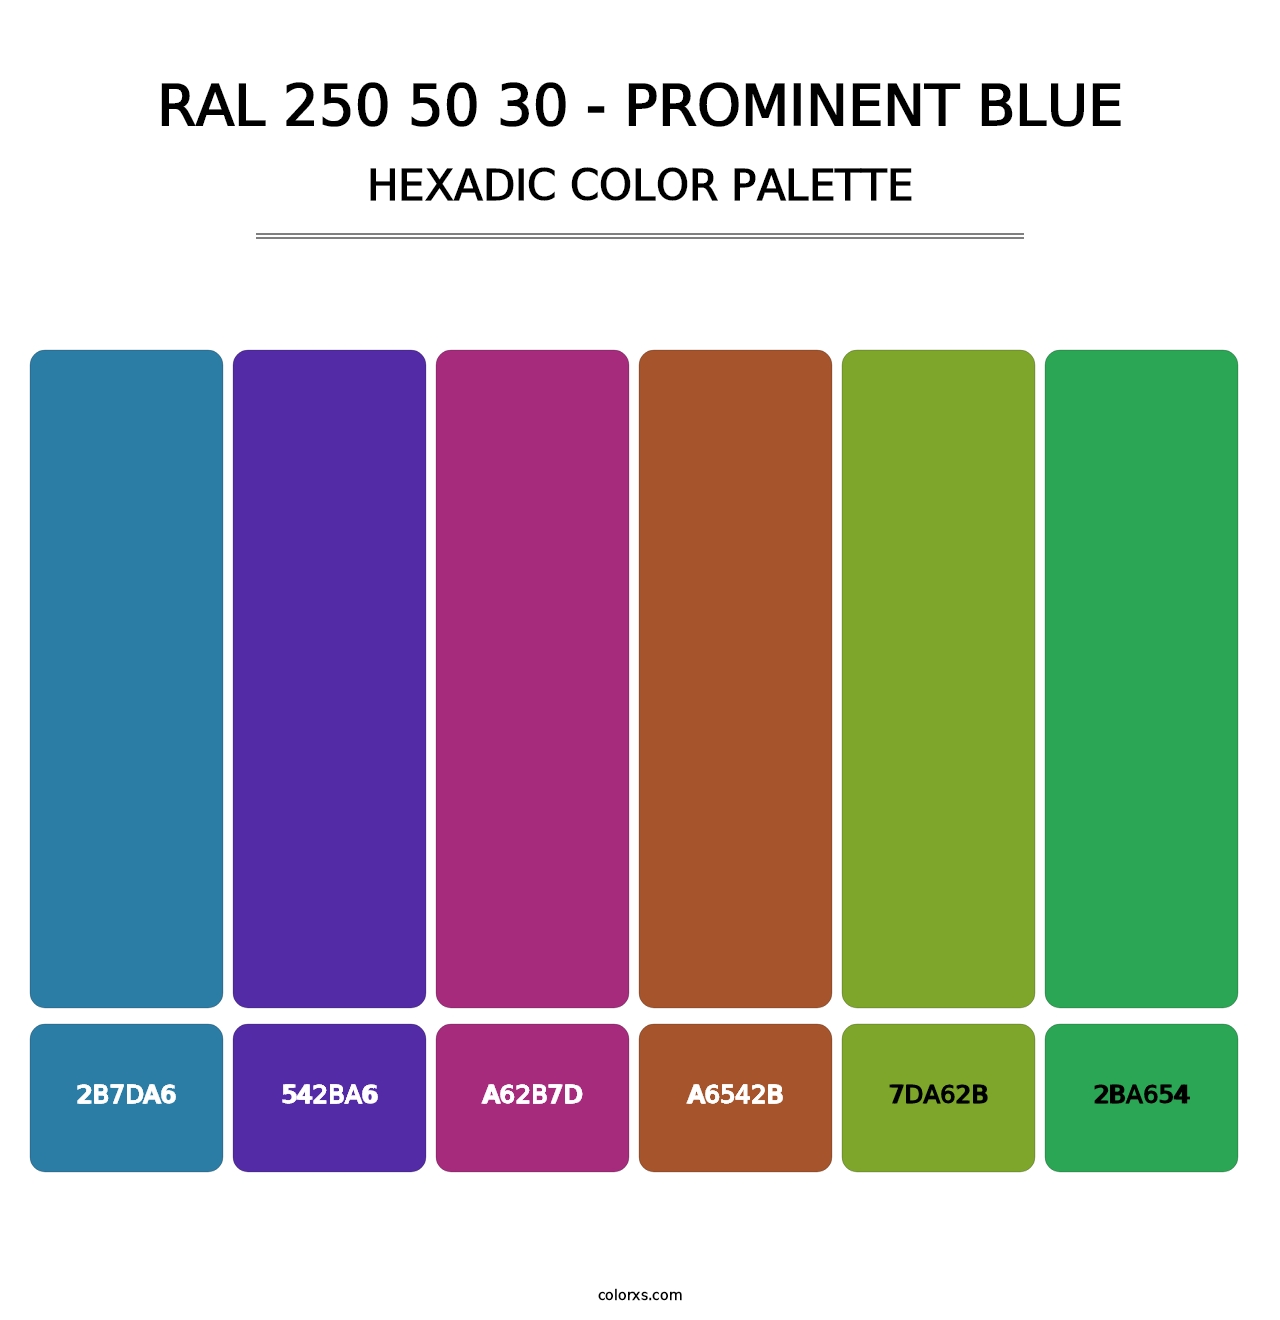 RAL 250 50 30 - Prominent Blue - Hexadic Color Palette